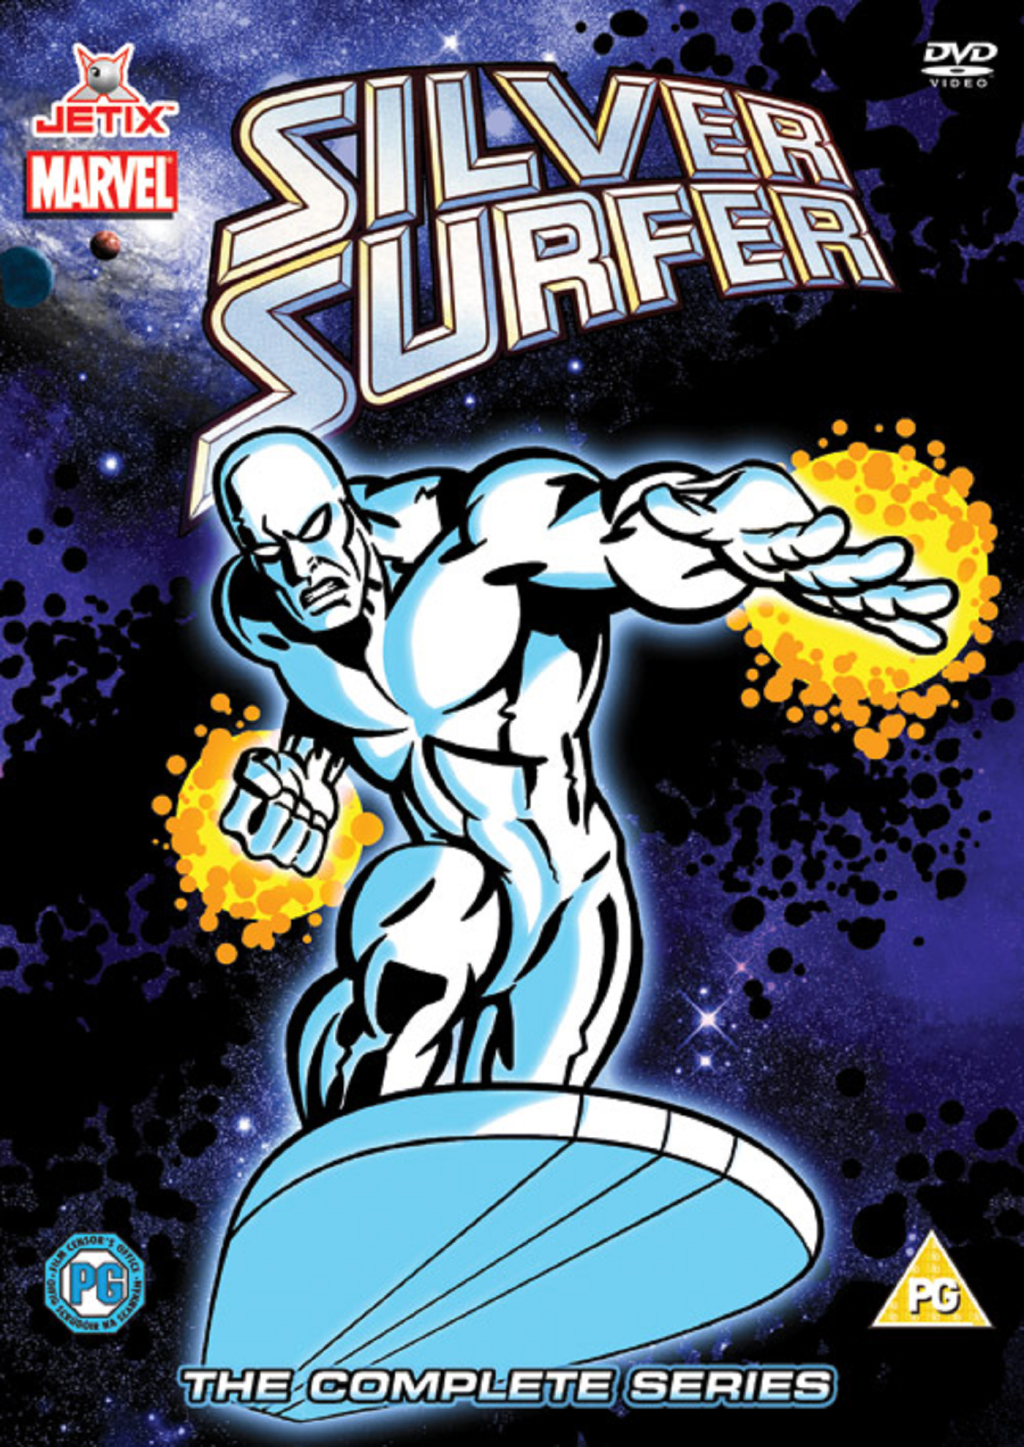 Silver Surfer (Fox, 1998) - Al Kennedy joins Tim Worthington for a chat about Norrin Radd gaining the cosmic ability to look a bit sad every couple of seconds in It’s Good, Except It Sucks - a movie by movie – and television series by television series – hurtle through the Marvel Cinematic Universe.